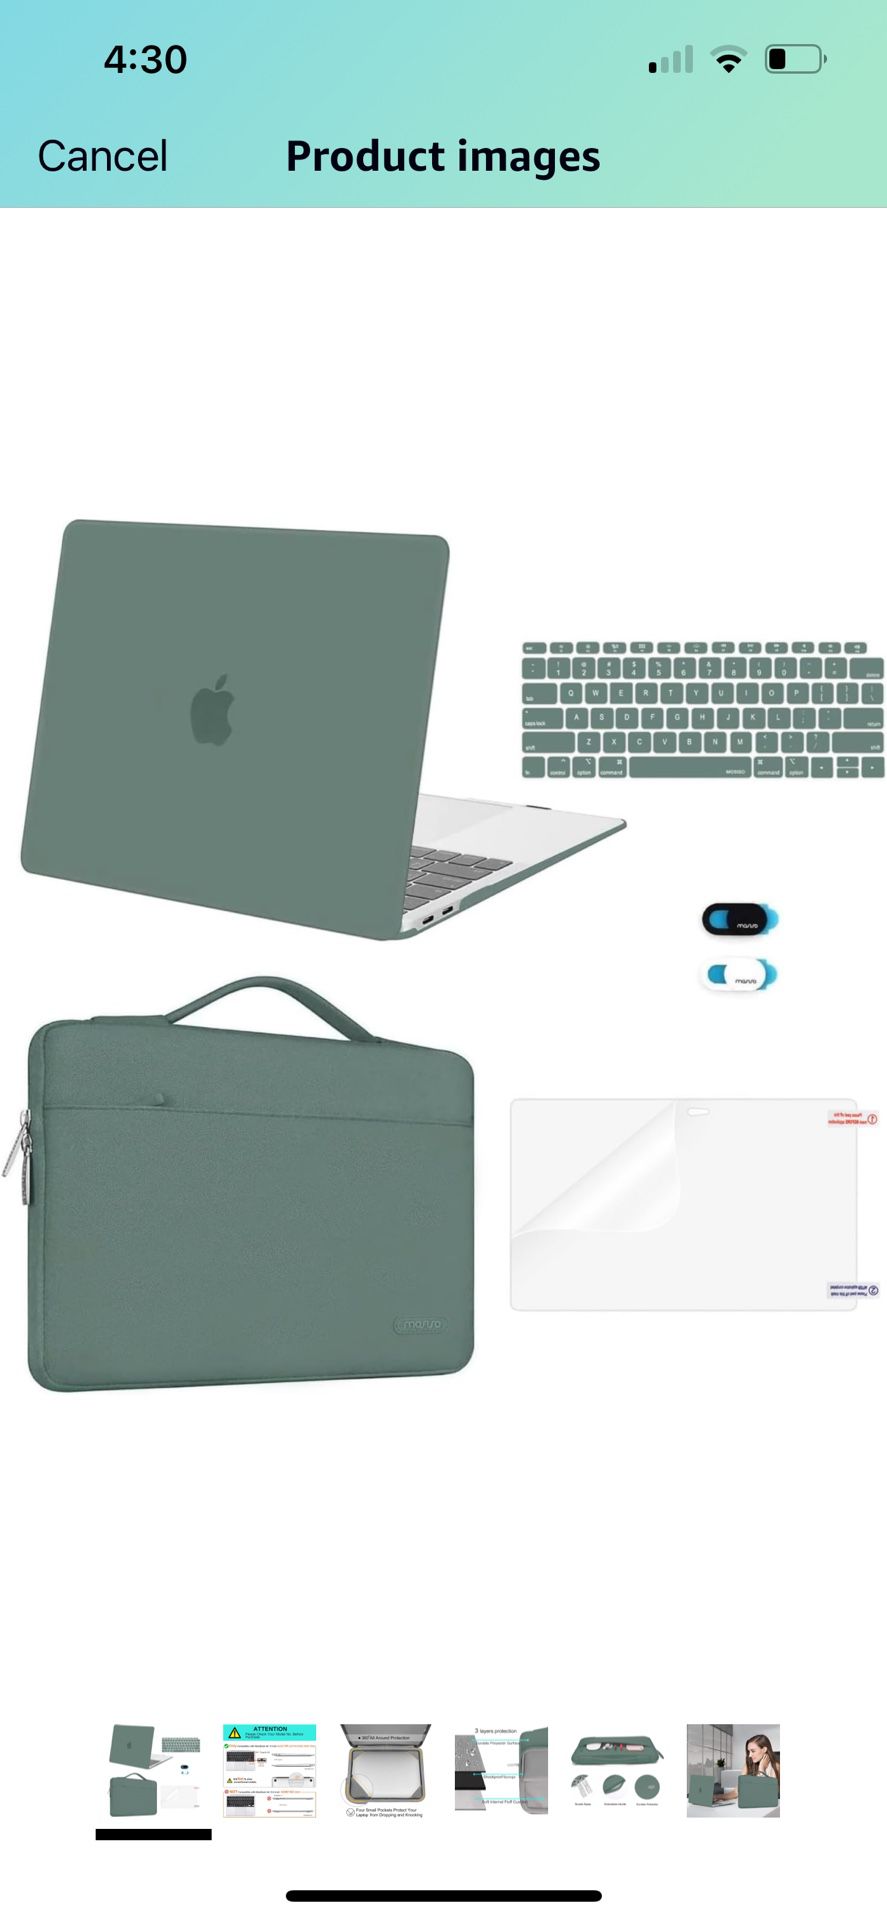 MOSISO Compatible with MacBook Air 13 inch Case